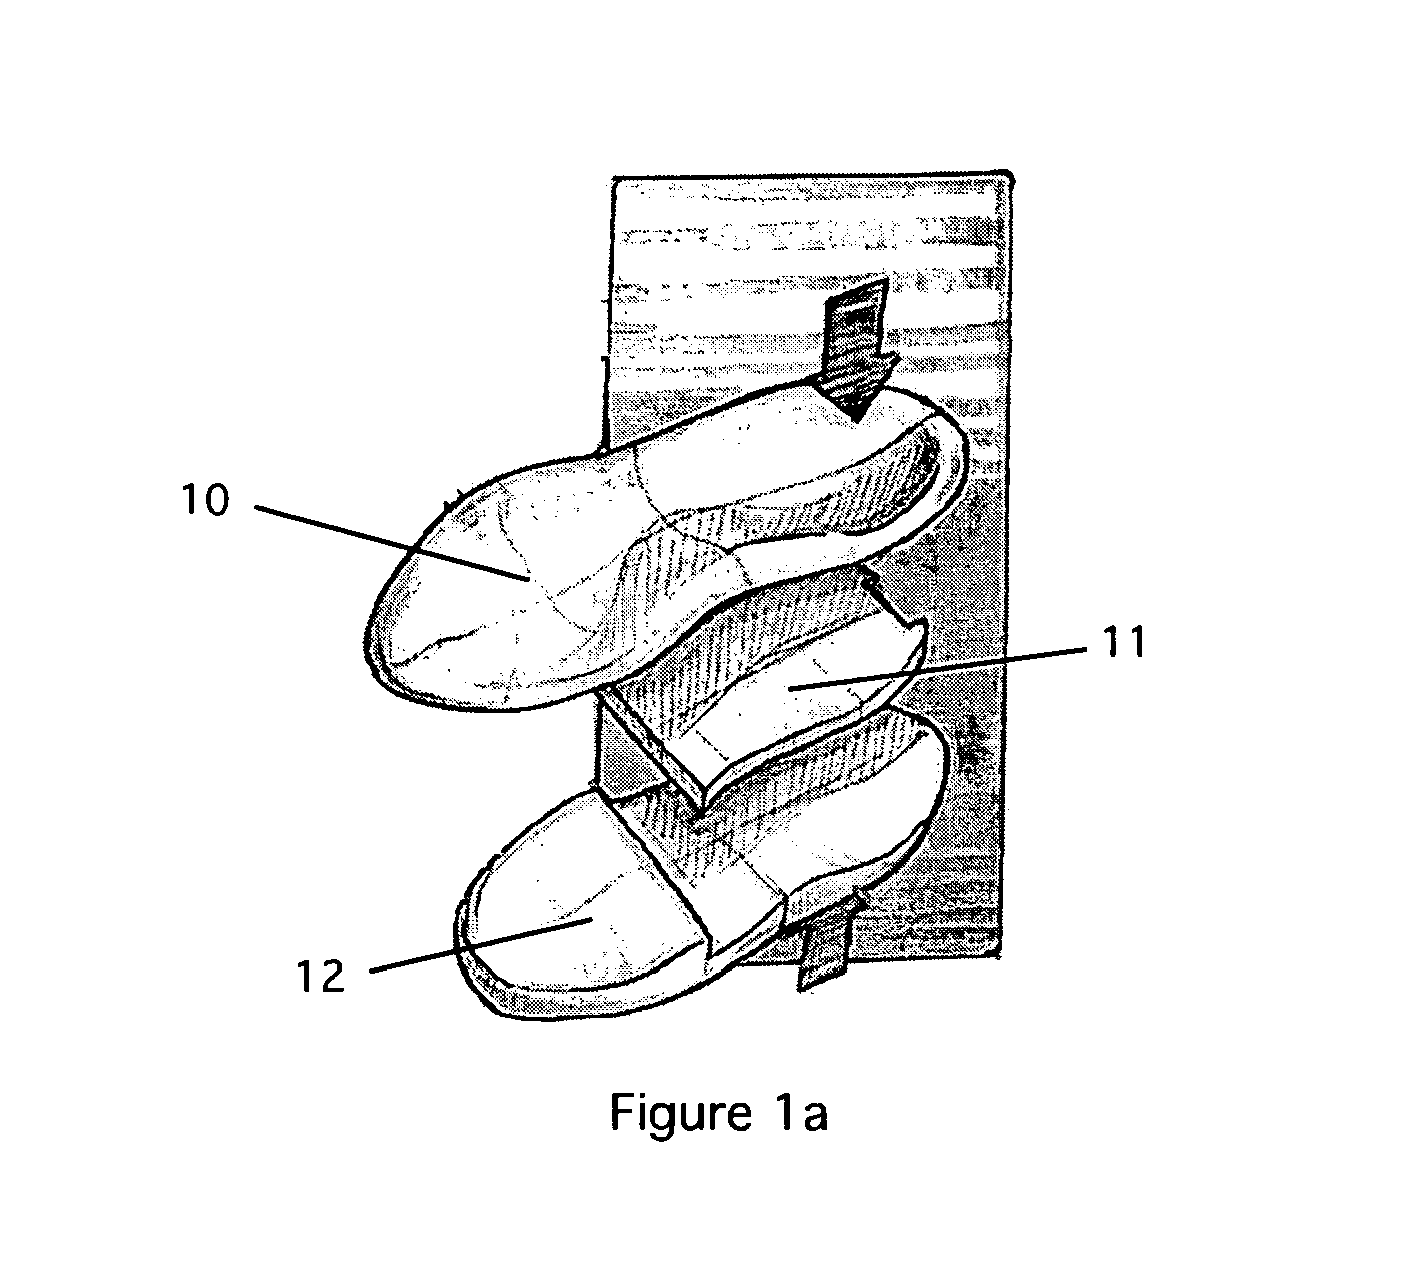 Method and apparatus for improving human balance and gait and preventing foot injury